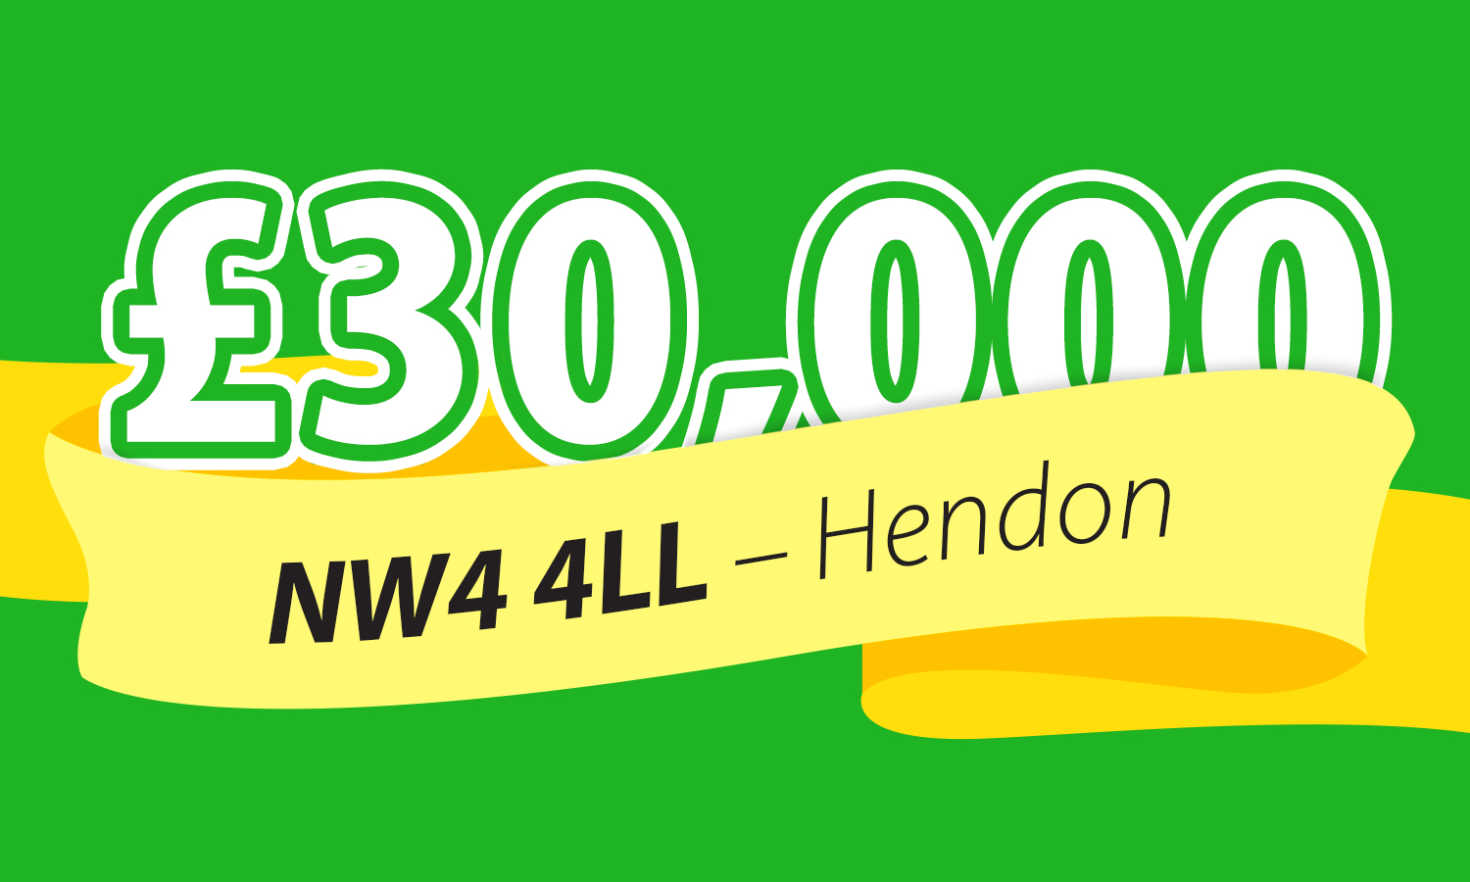 One lucky Hendon player has scooped £30,000 in today's Street Prize